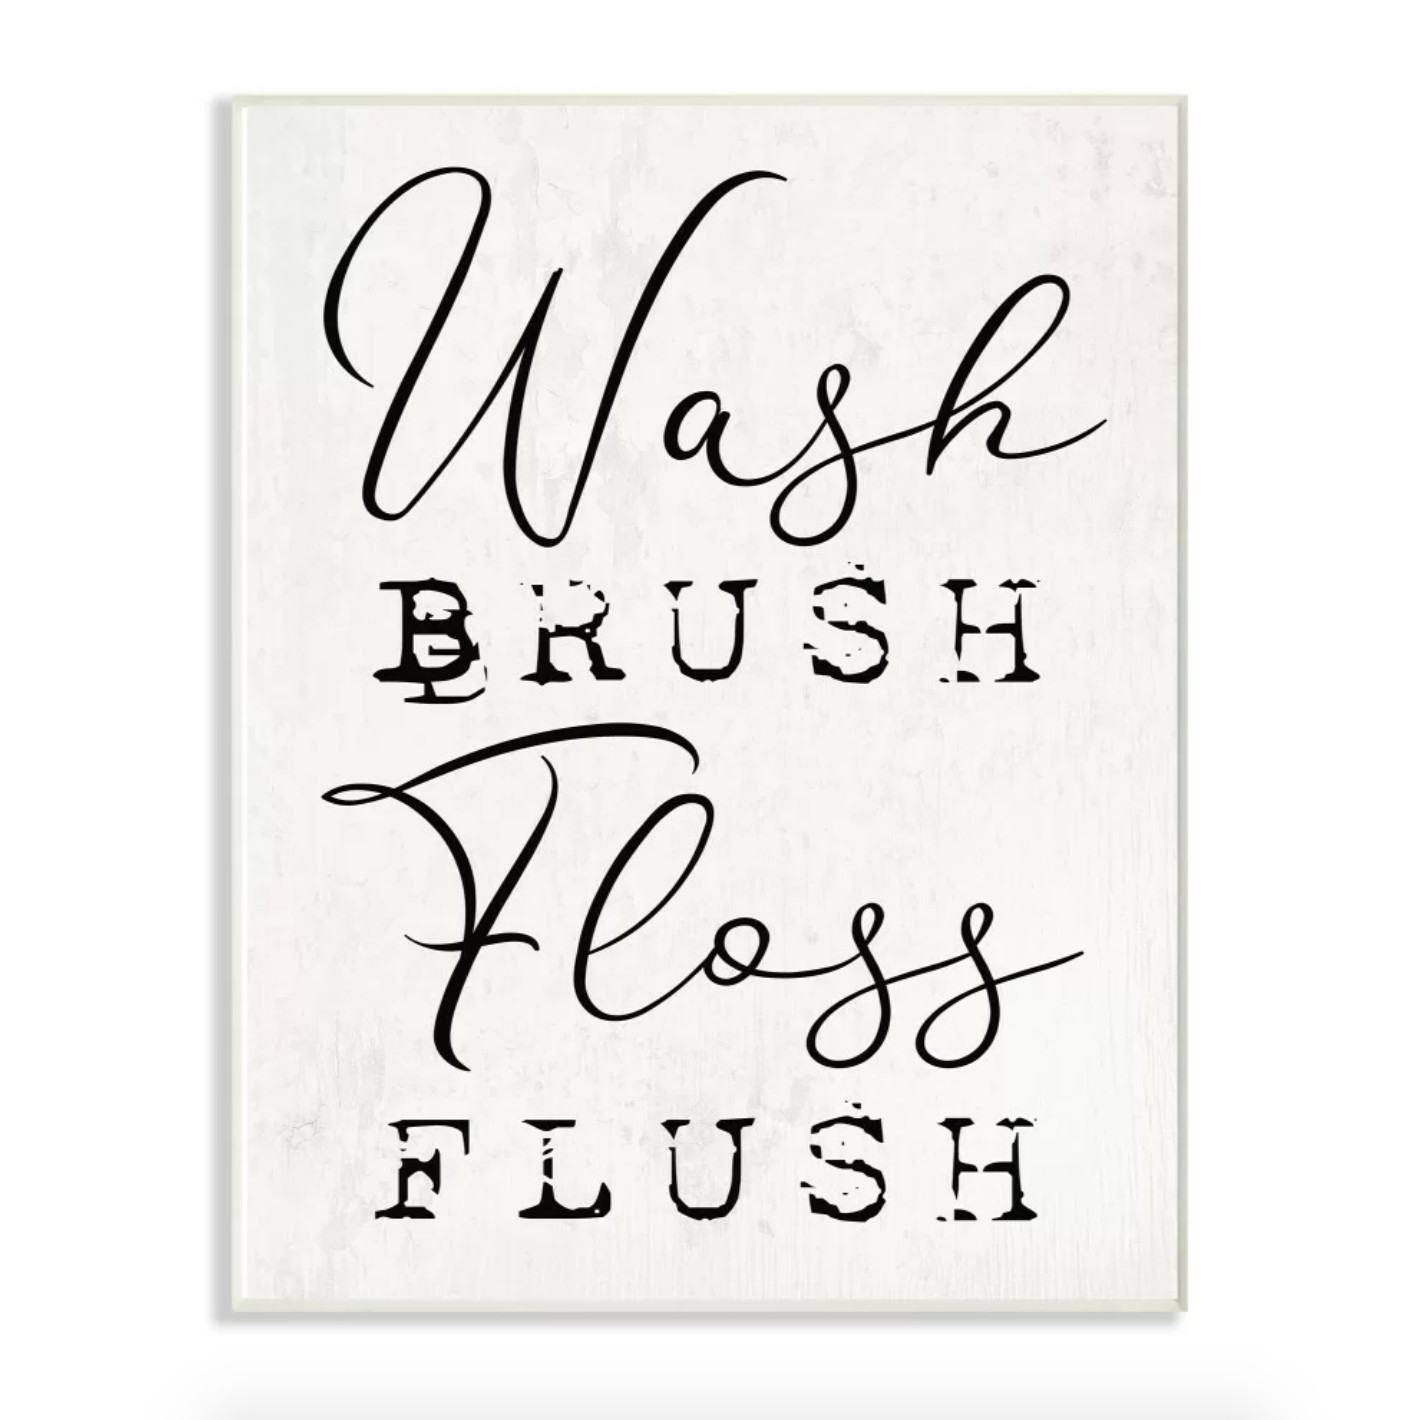 A piece of wall art that says, &quot;Wash, brush, floss, flush.&quot;